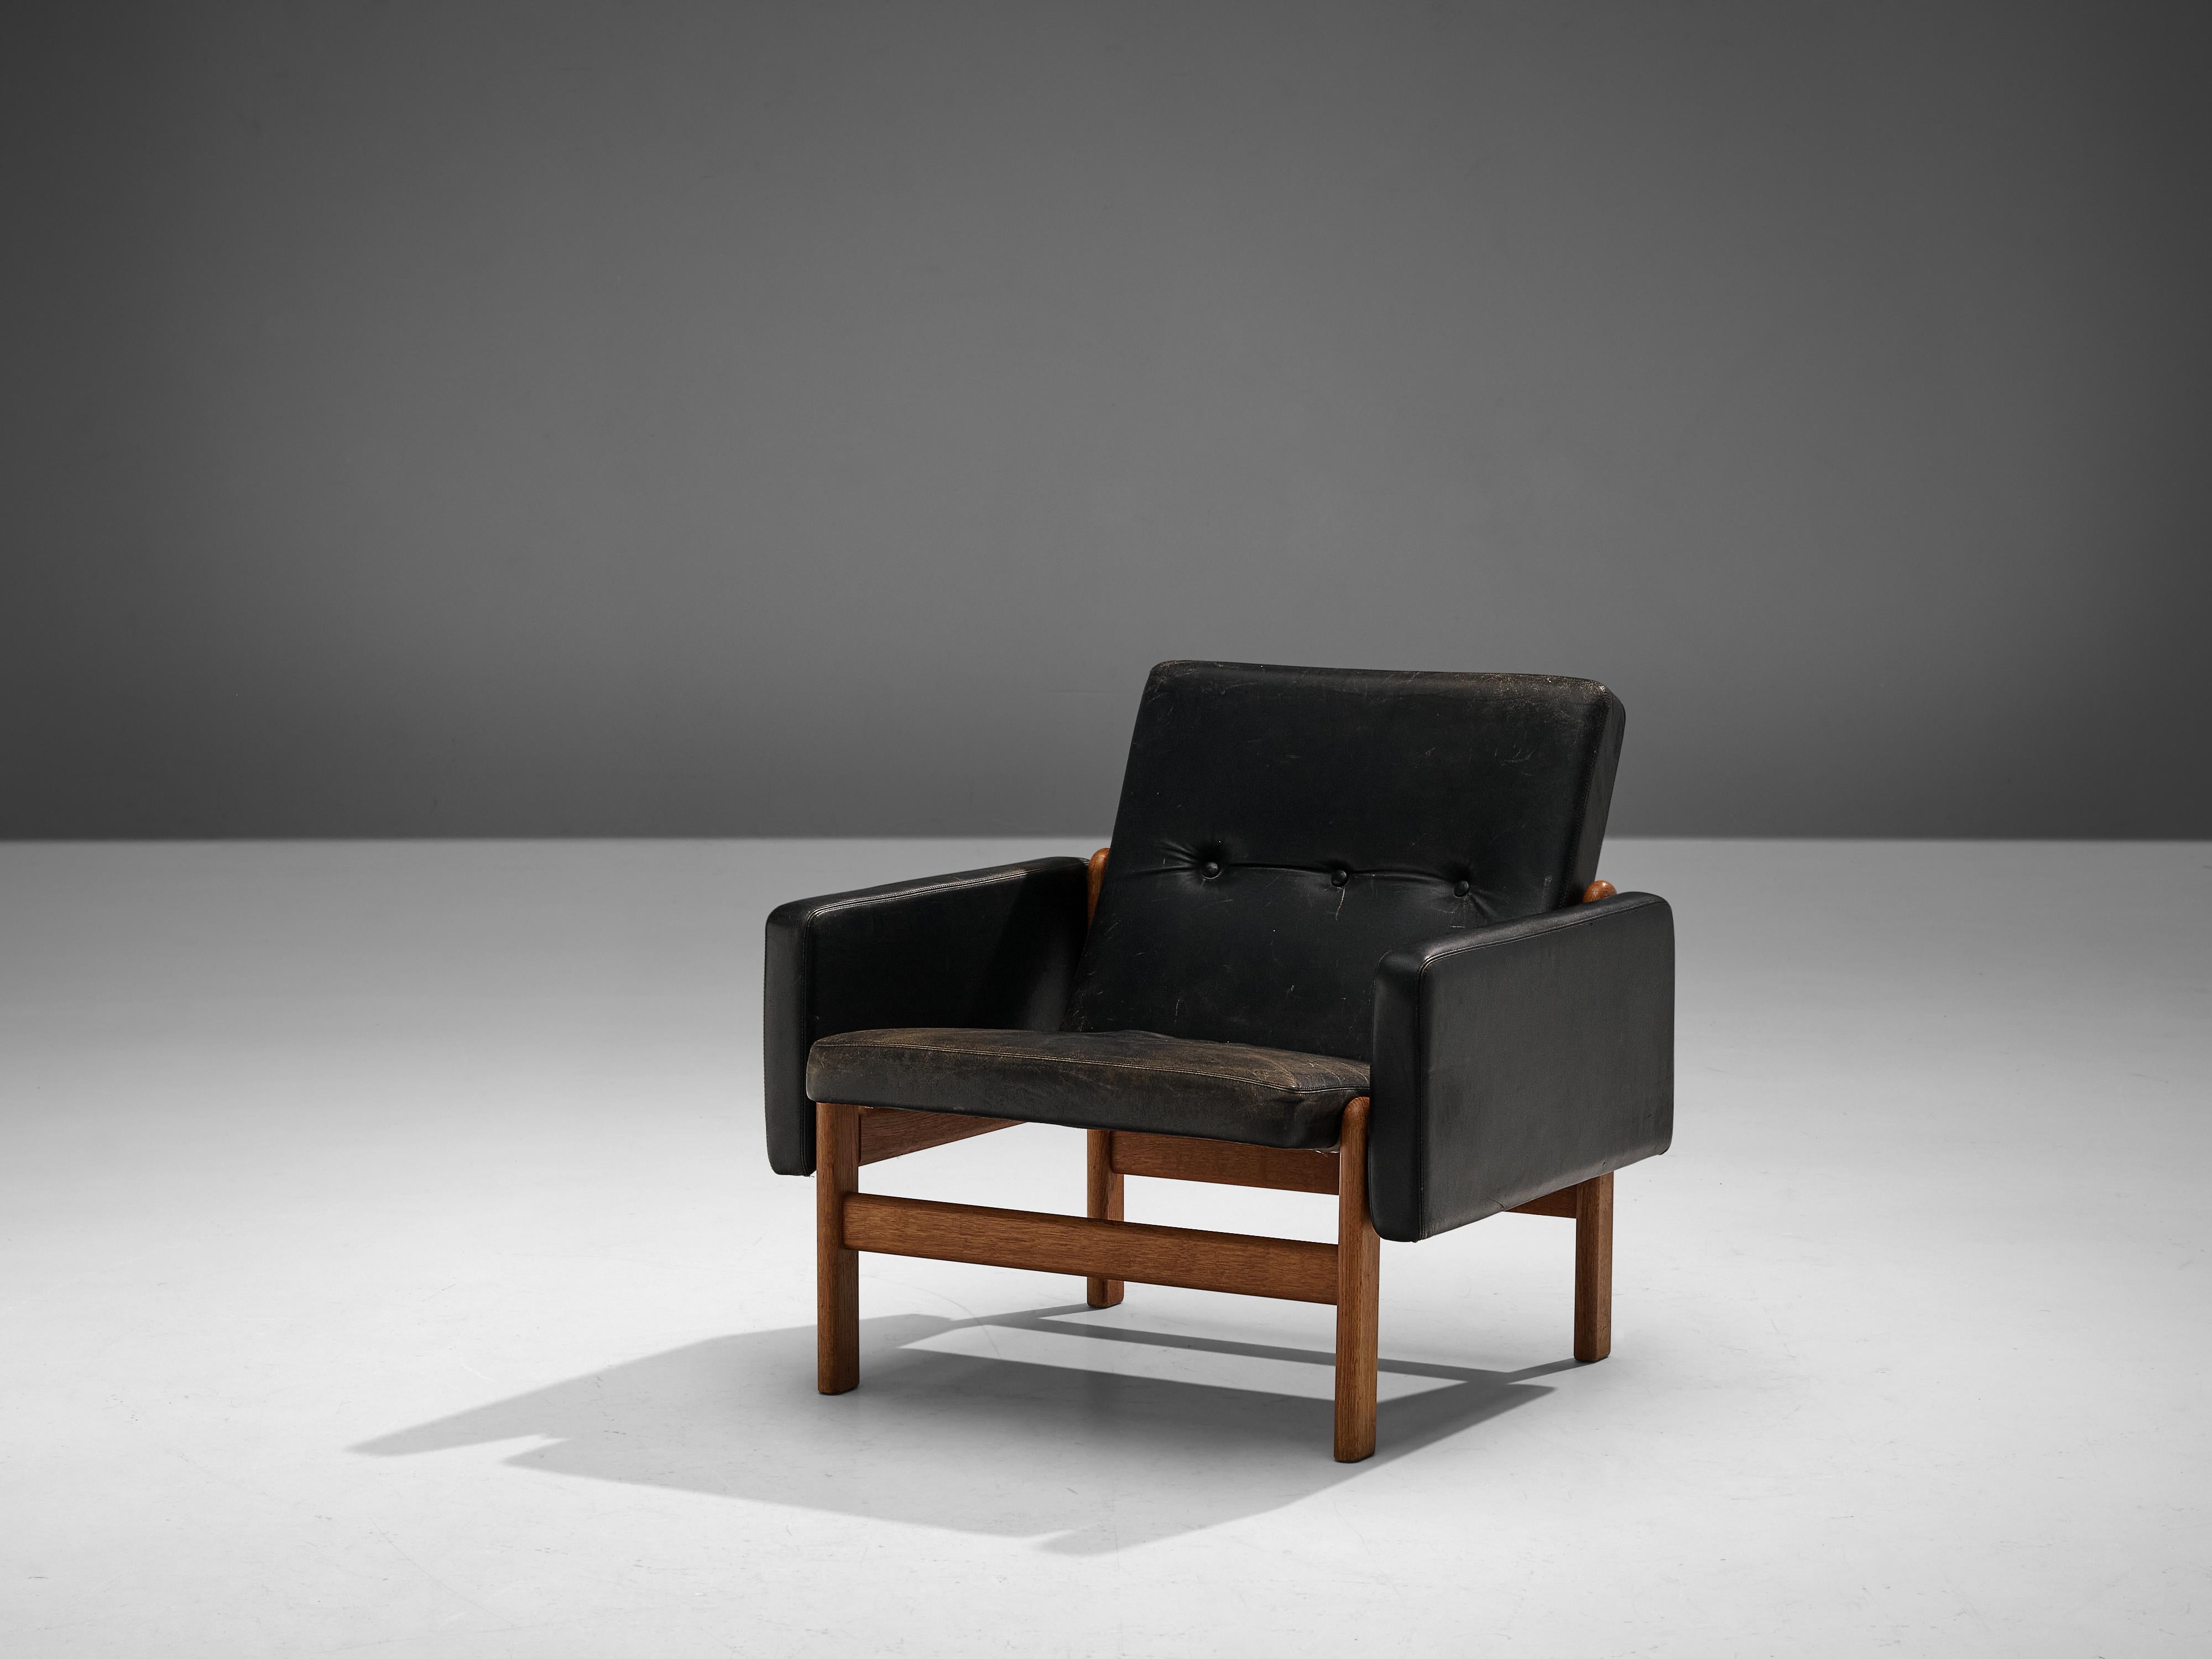 Jørgen Bækmark for FDB Møbler, easy chair, teak and leather, Denmark, 1960s

Easy chair designed by Jørgen Bækmark for FDB Møbler in the 1960s. This chair is simplistic yet elegant and modern in design. Due to the structured frame, it has a very